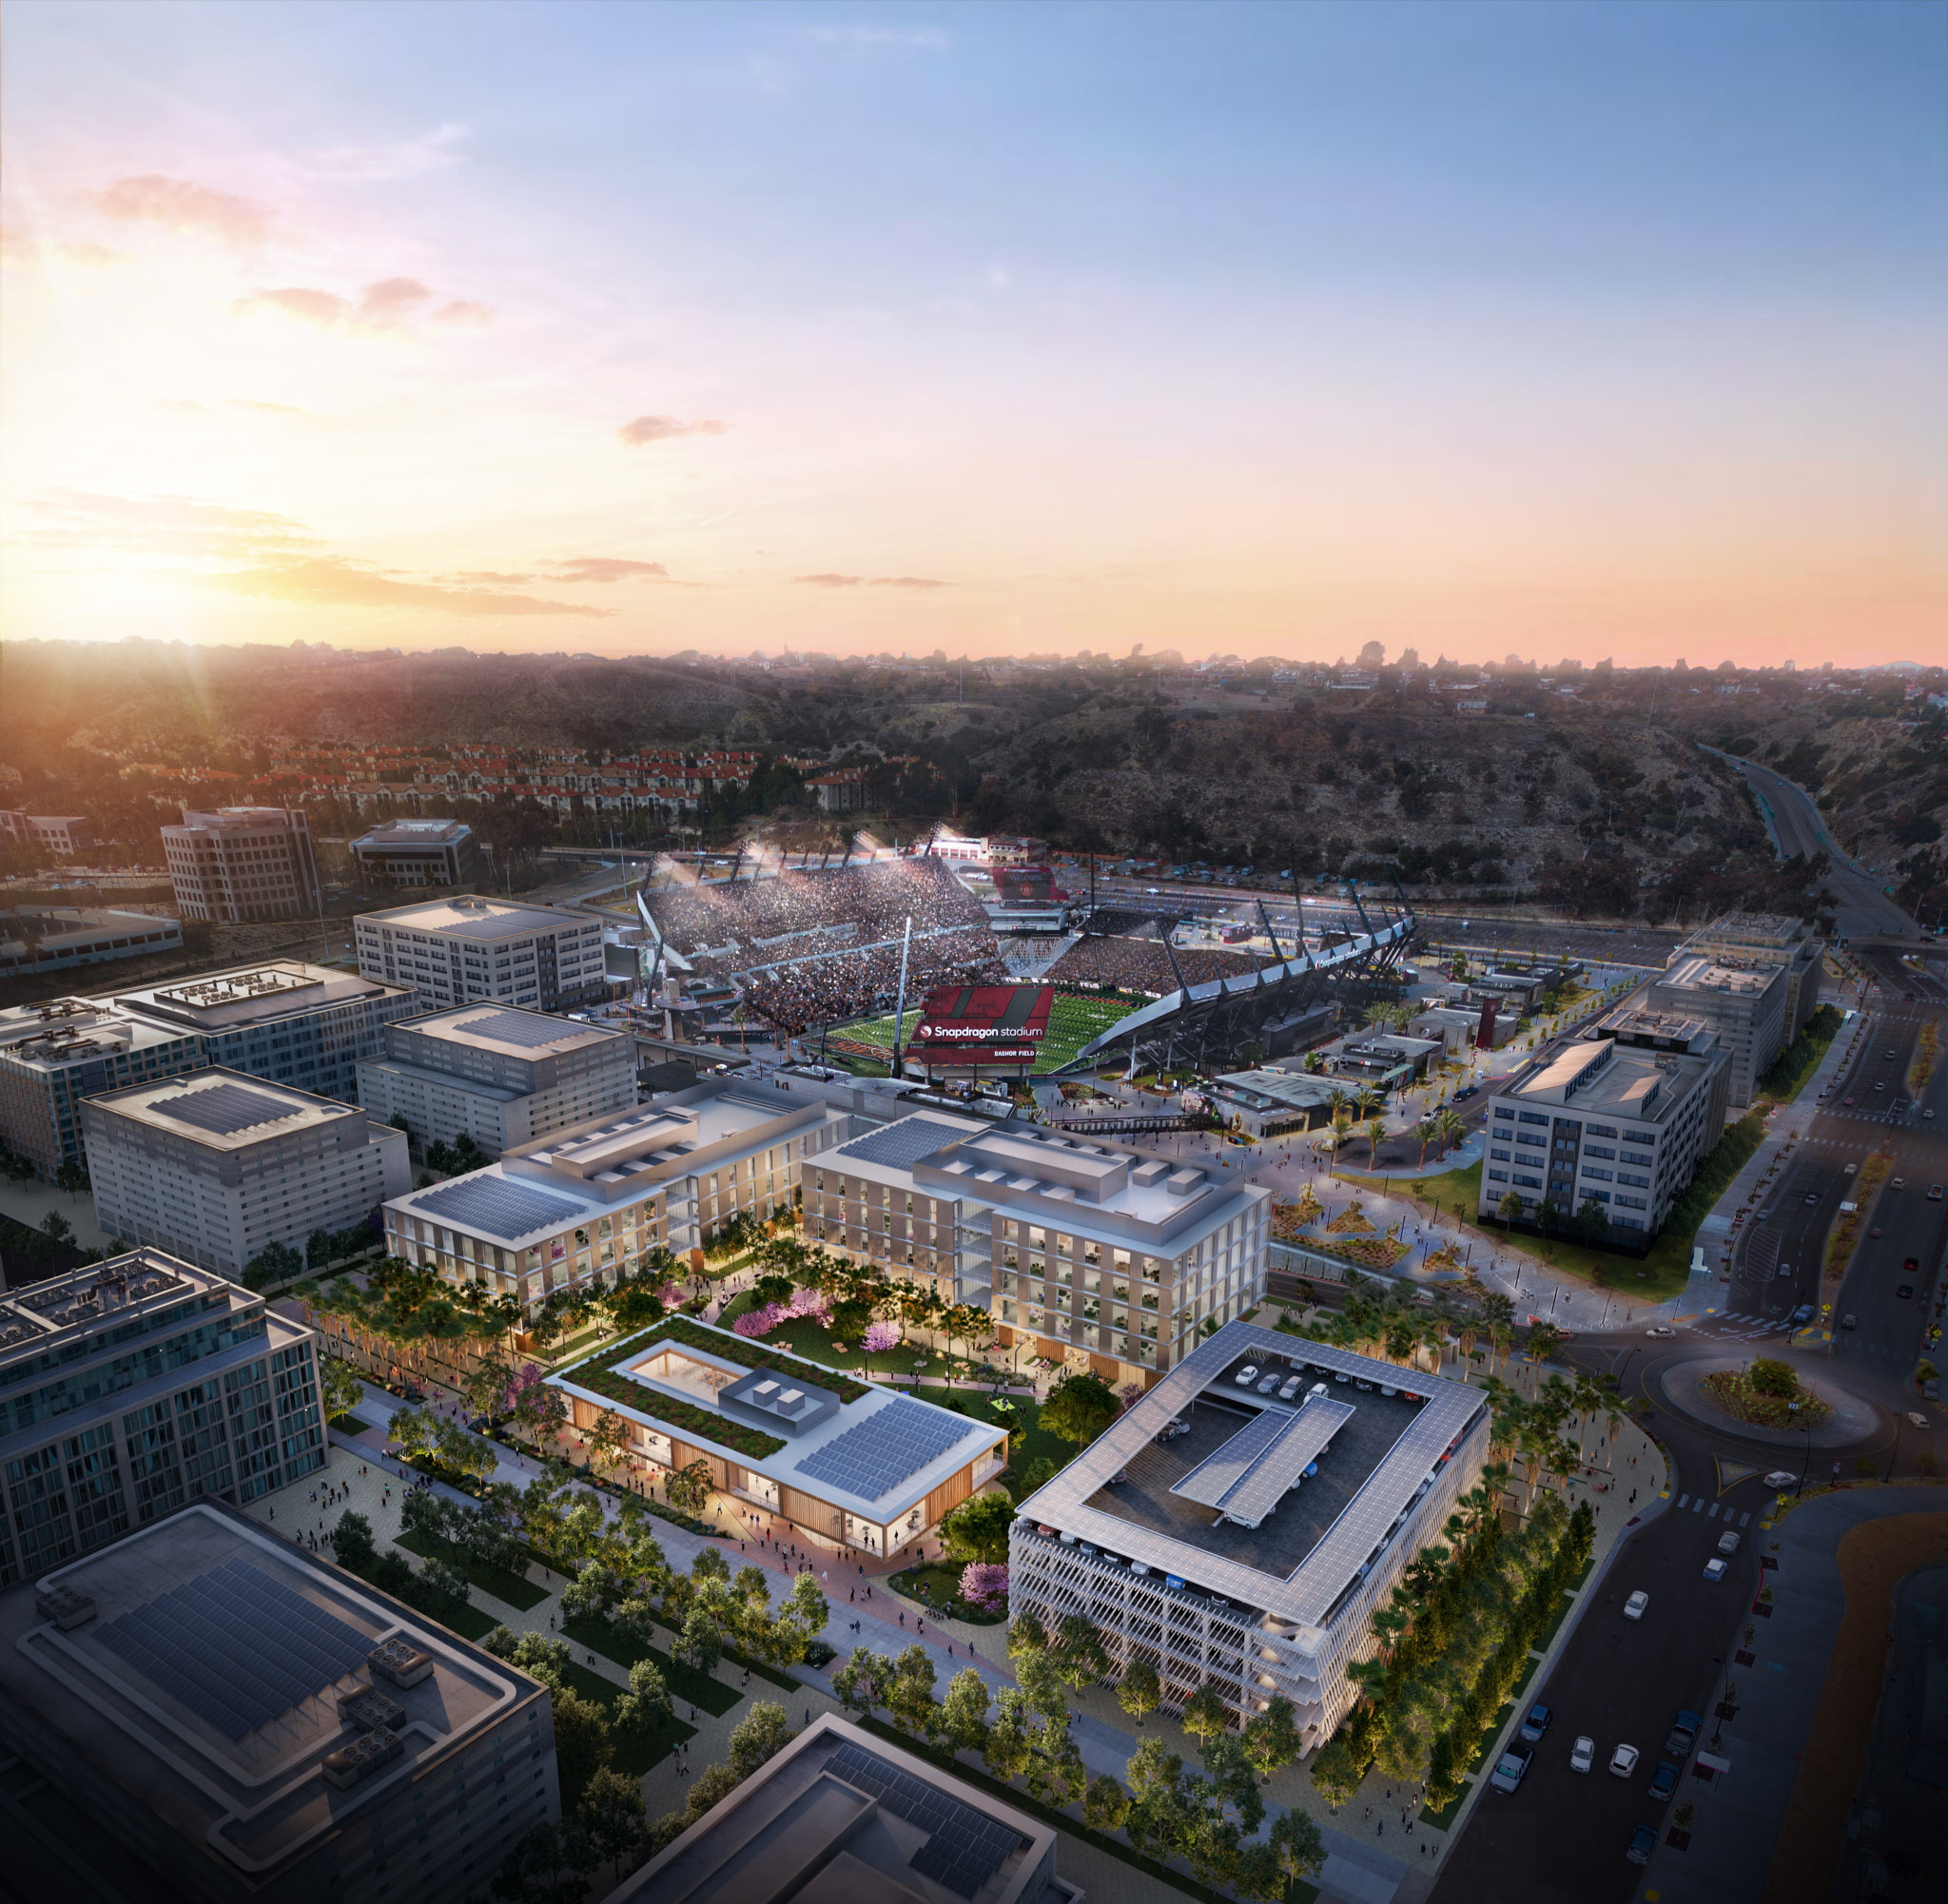 Aerial view of the first innovation district project as proposed by LPC West. Courtesy of LPC West; Design: Lever / FPBA / JCFO; Image by E Studio Nod.